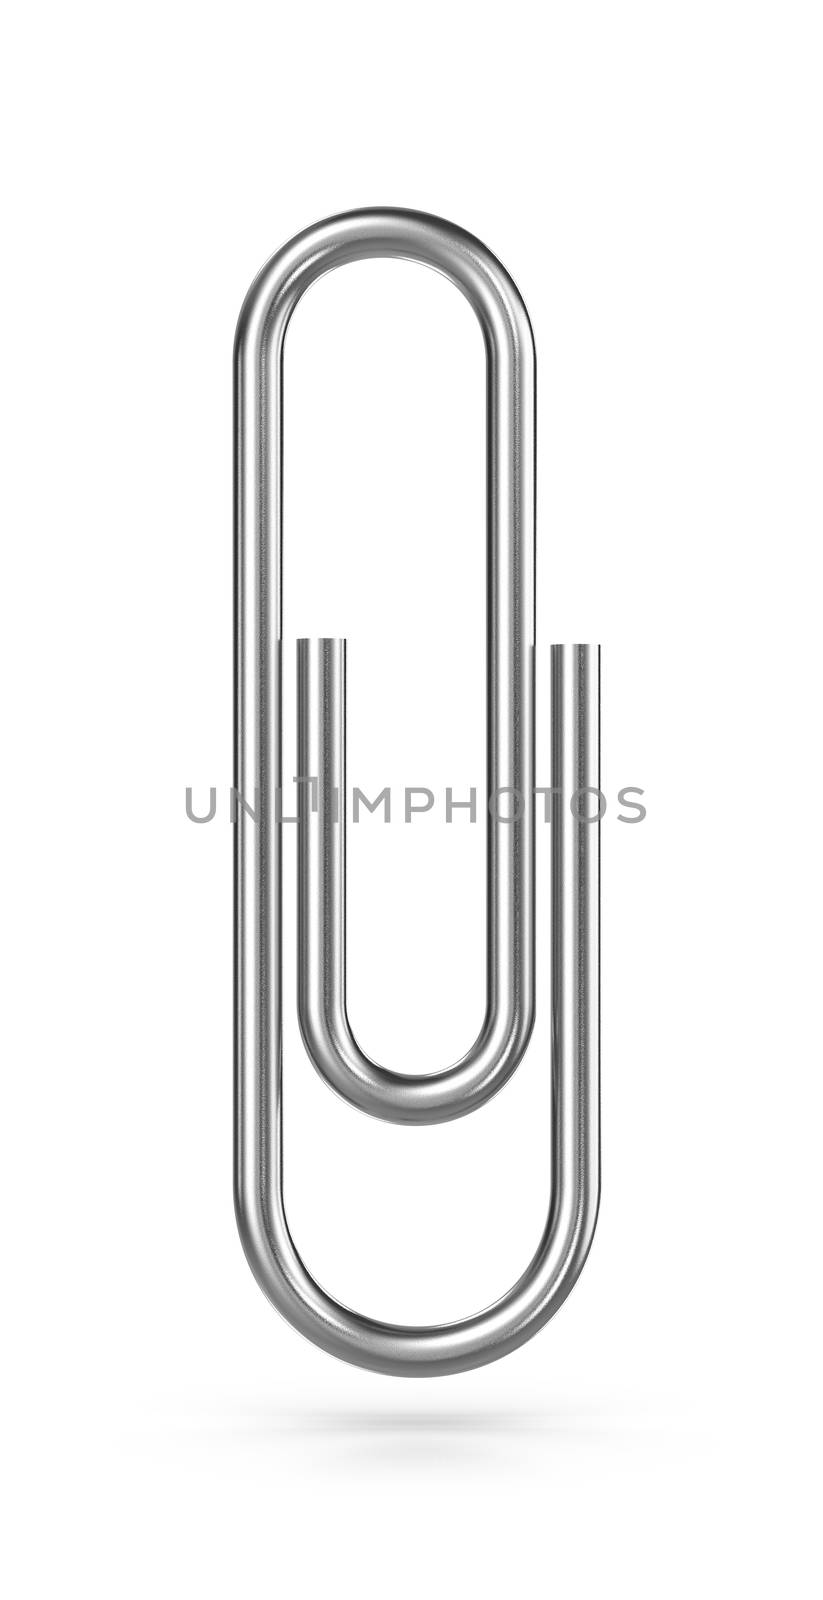 Metallic Paperclip on White by make